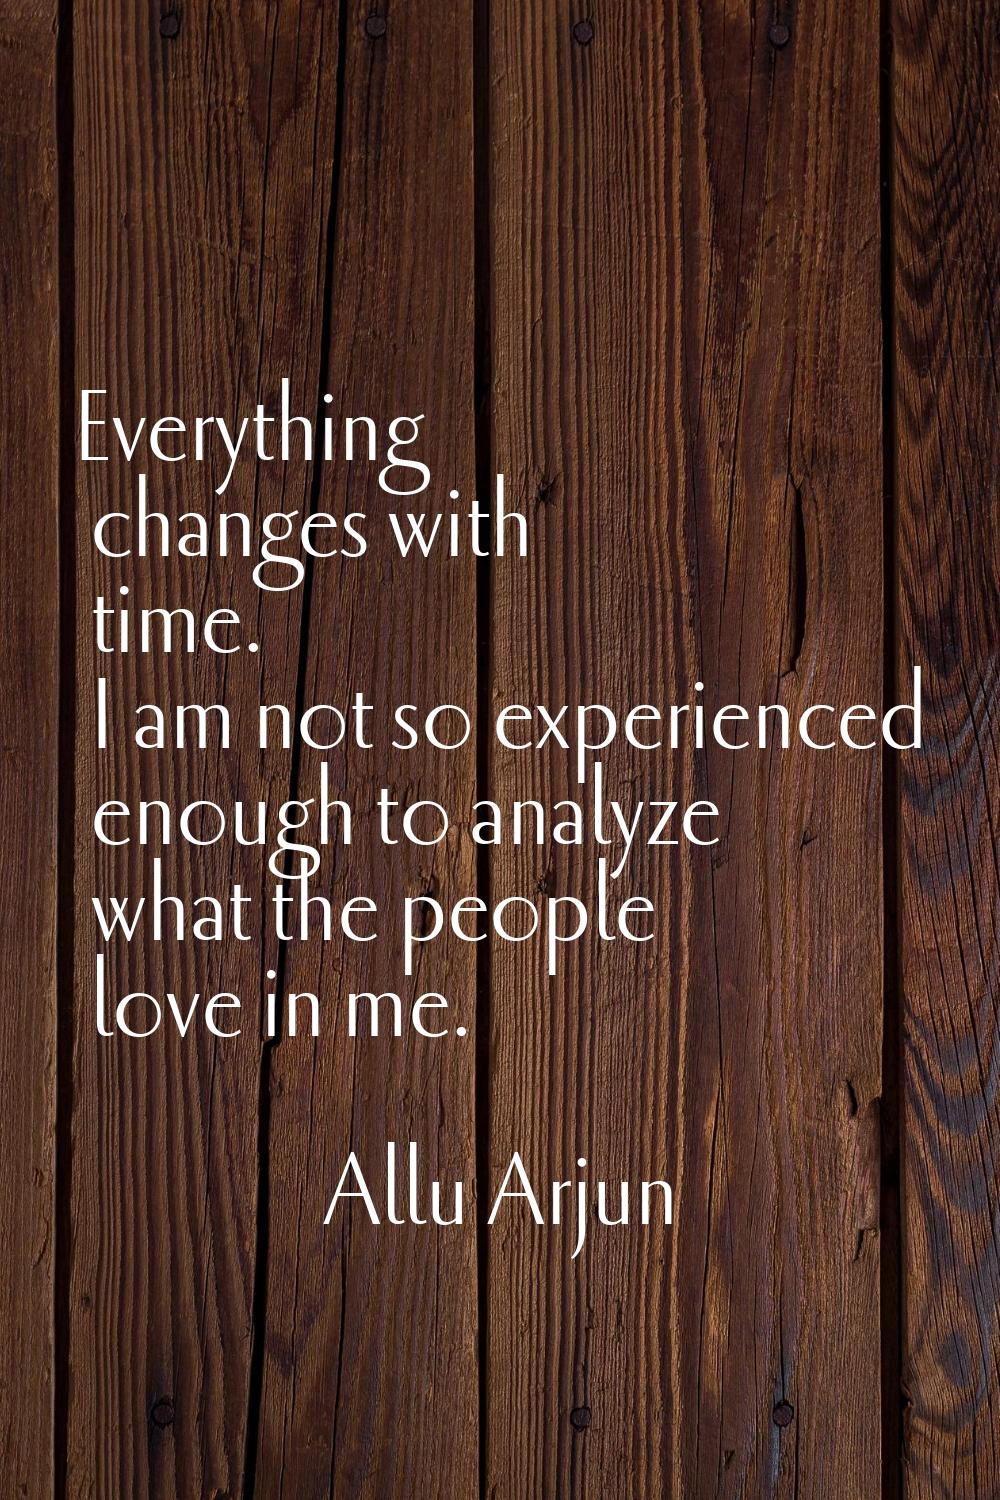 Everything changes with time. I am not so experienced enough to analyze what the people love in me.